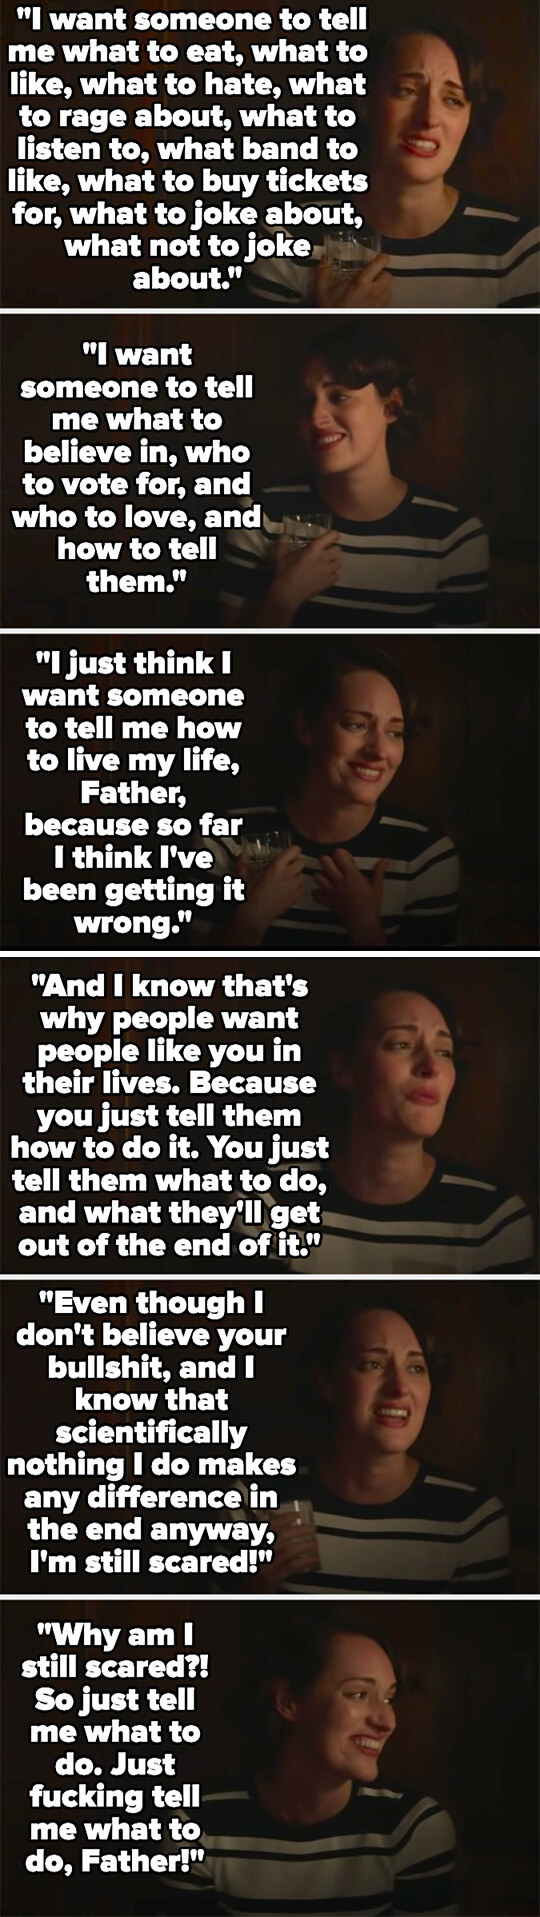 Fleabag talks about how she wants to be told what to do because she feels like she&#x27;s been living her life wrong, and that she knows that that&#x27;s what religion is about, even though she doesn&#x27;t believe in it, but she&#x27;s still scared